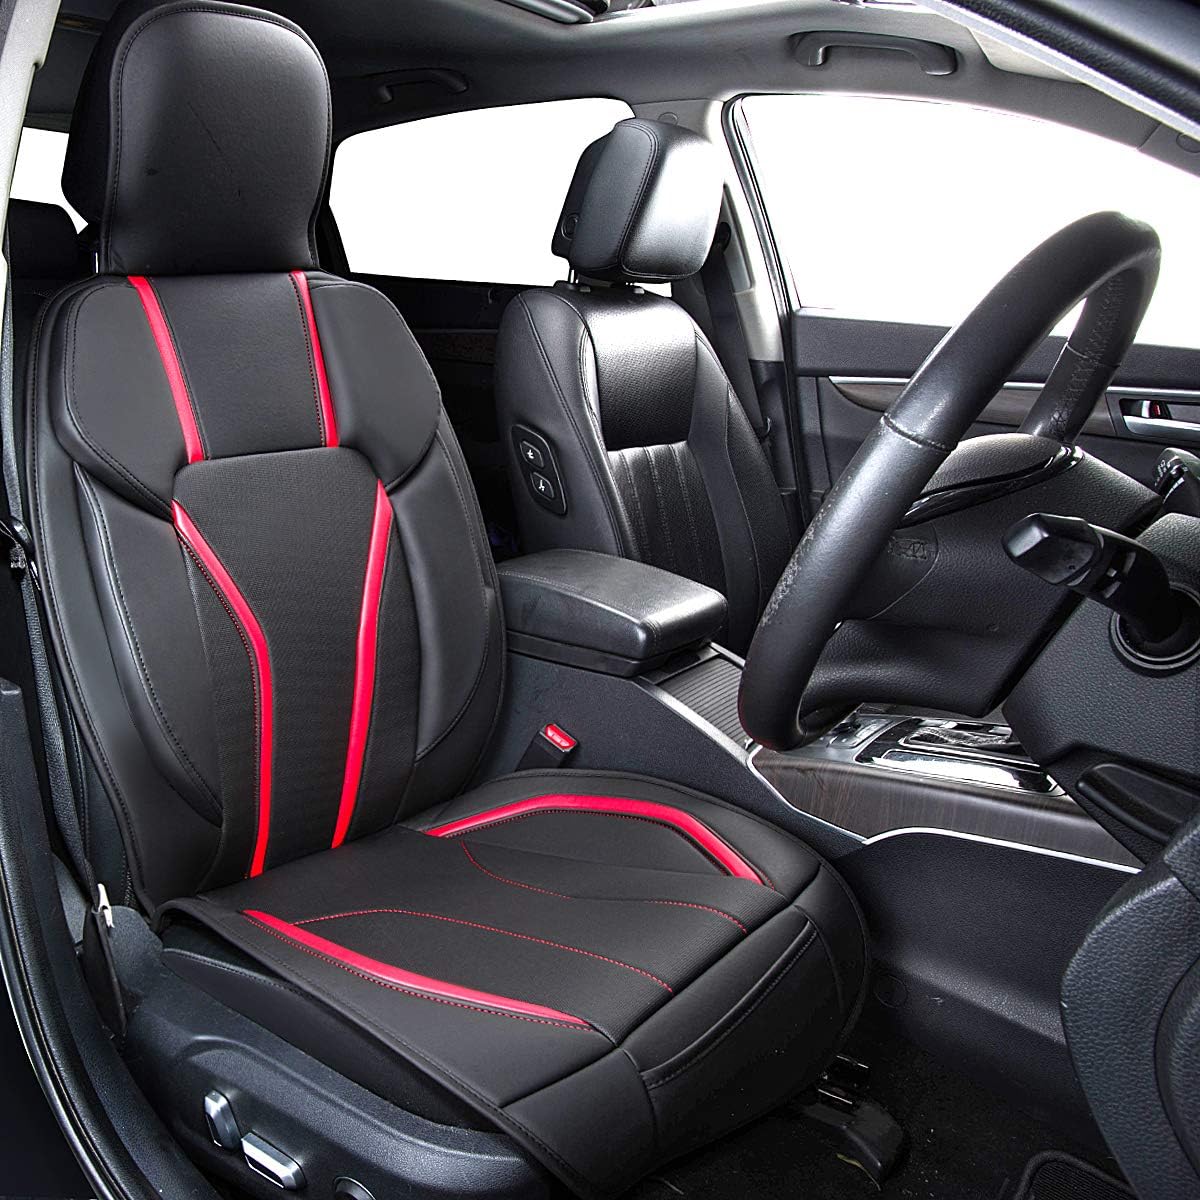 CAR PASS Universal Fit Sporty Leather Easy Install Sidelss Car Seat Cover, Seat Cushion,Fit for suvs,Vans,sedans,Truck(Black and Red)